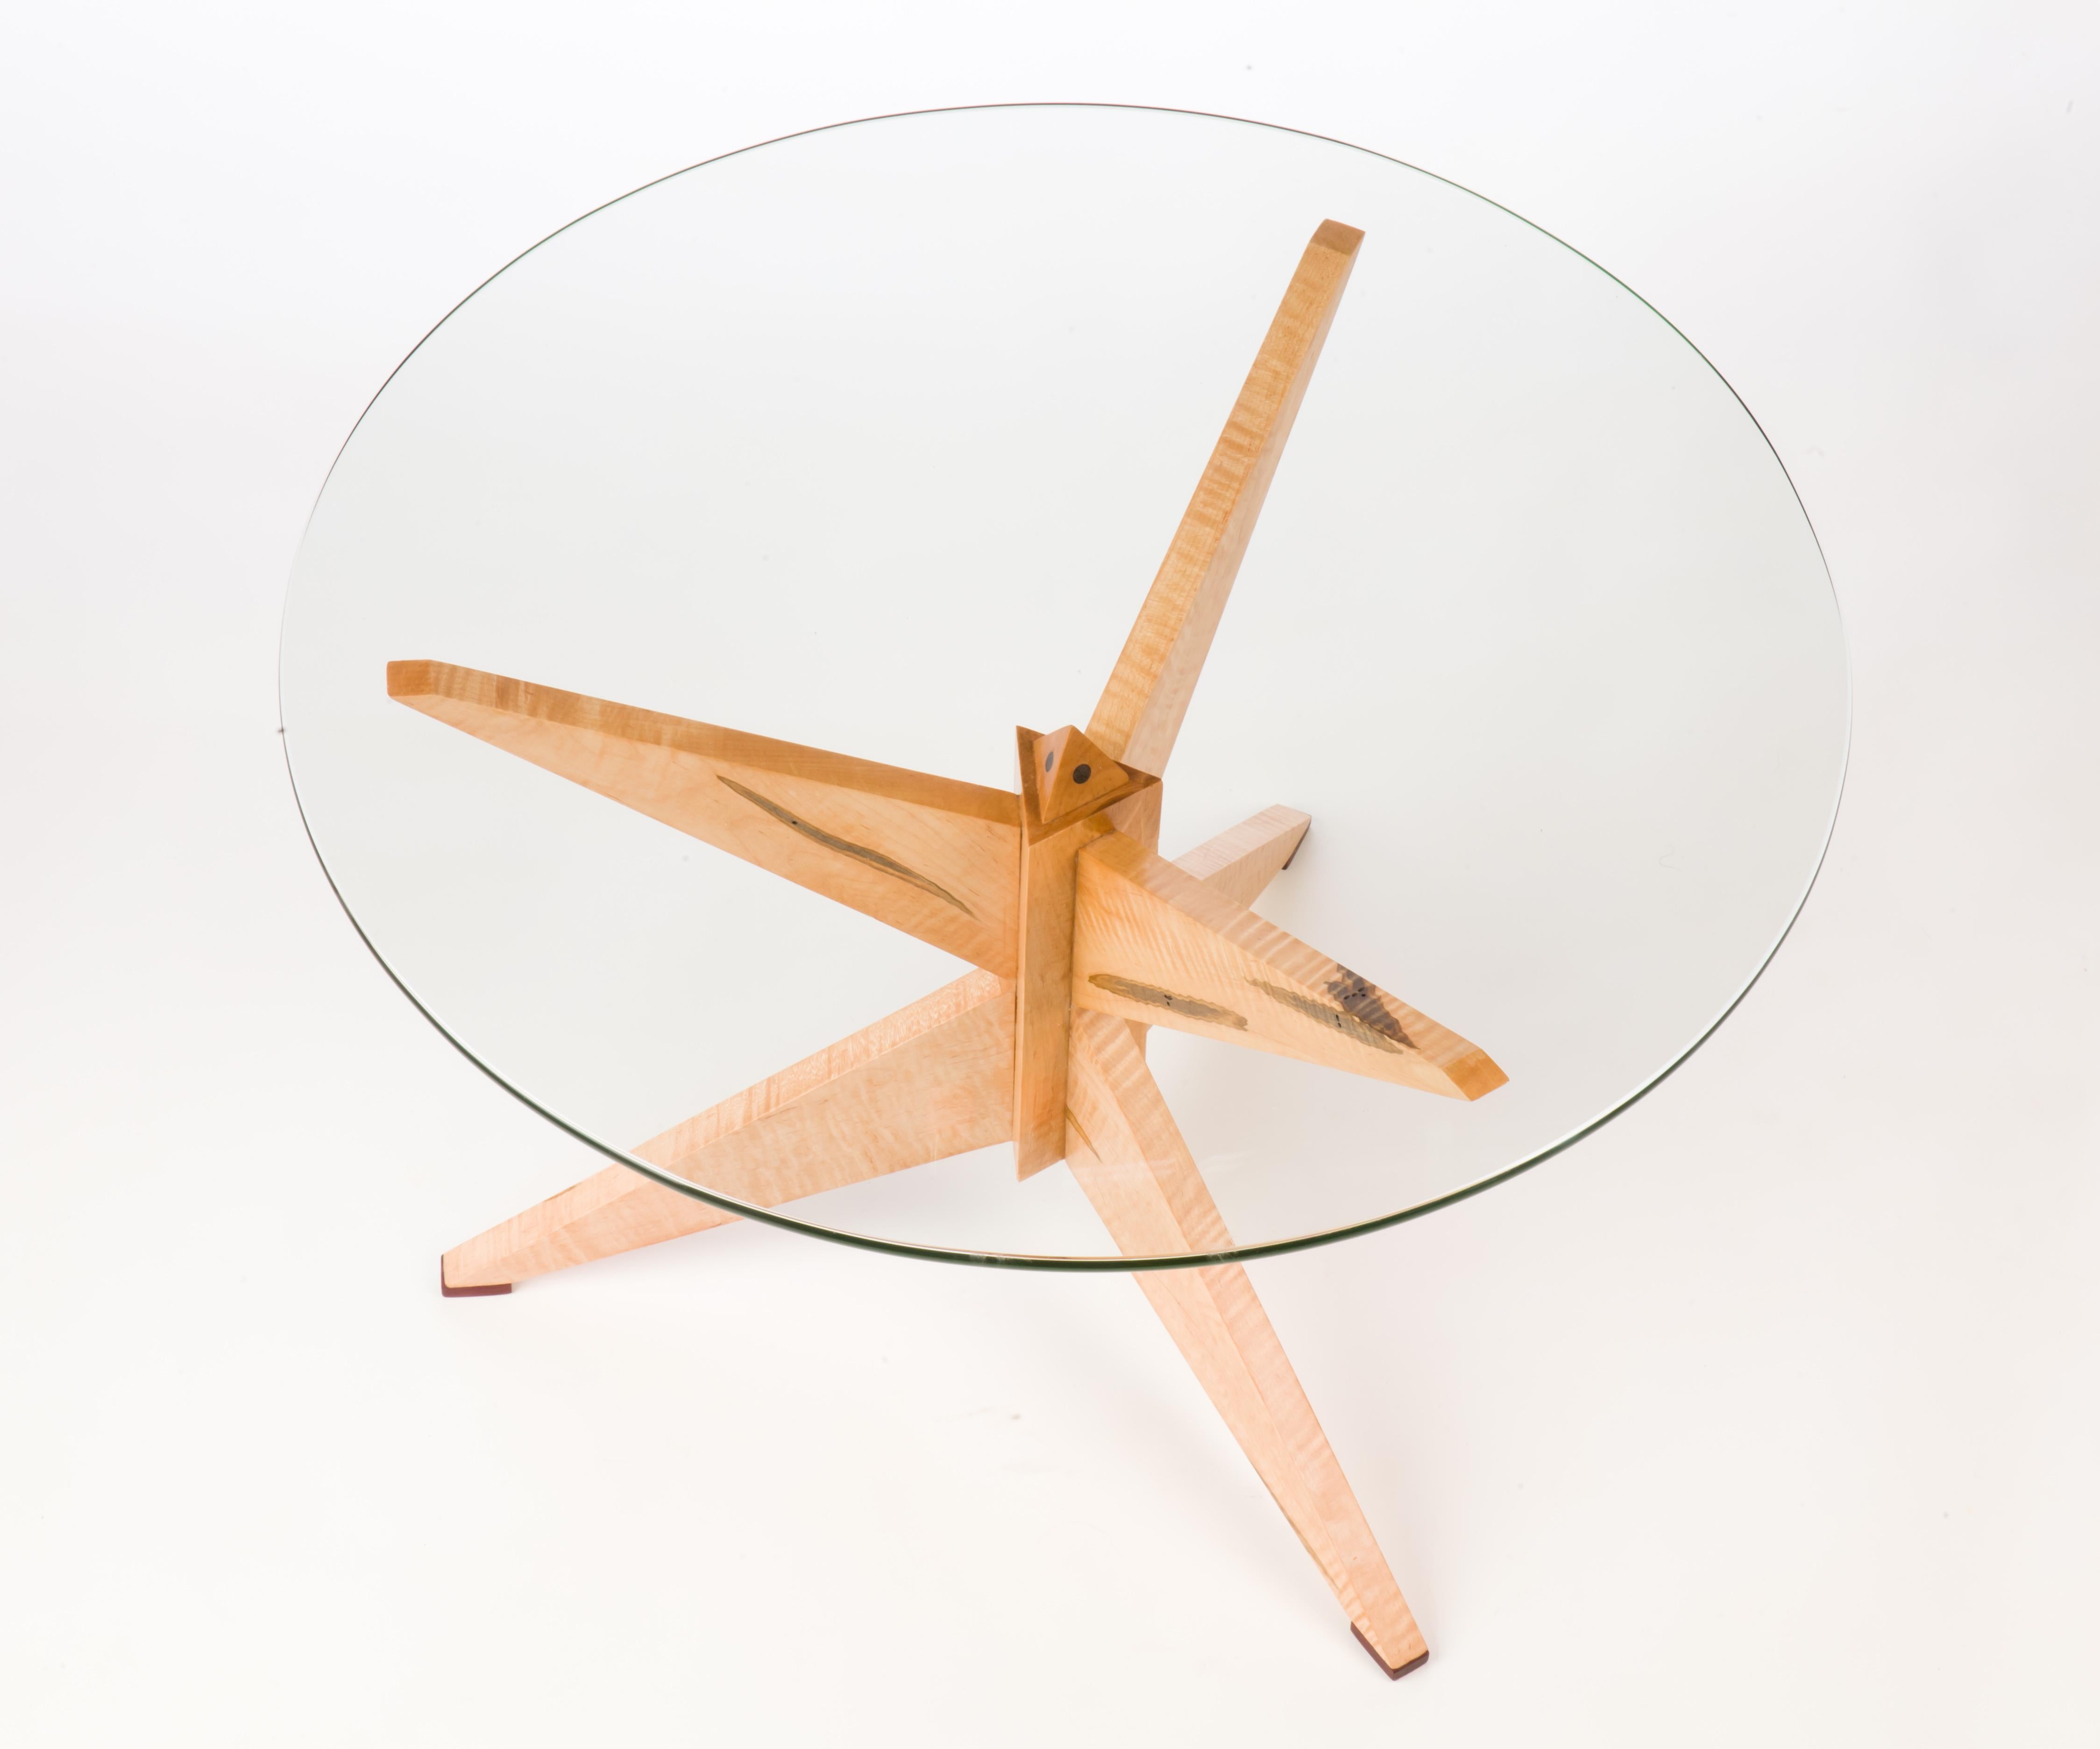 The Curly Maple TetraTeaTable, and its twin, were my first to use sliding dovetails to join their legs. This sublime joinery, and its resultant strength, enable an ample expanse of glass to be at your fingertips while the Tetrahedron, and its third